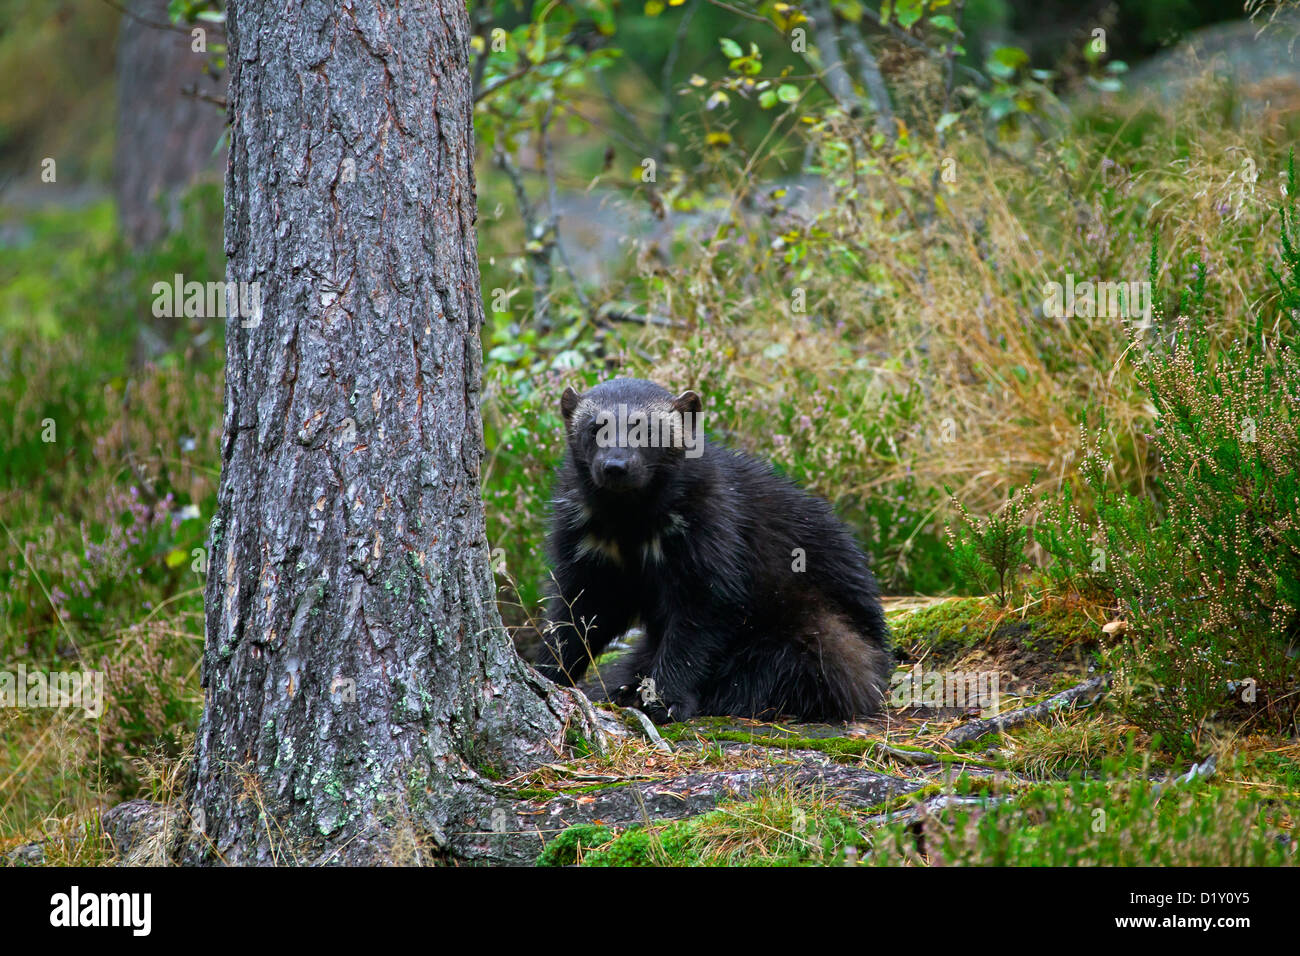 Wolverine (Gulo gulo) sitting next to tree in boreal forest at the taiga in Sweden, Scandinavia Stock Photo